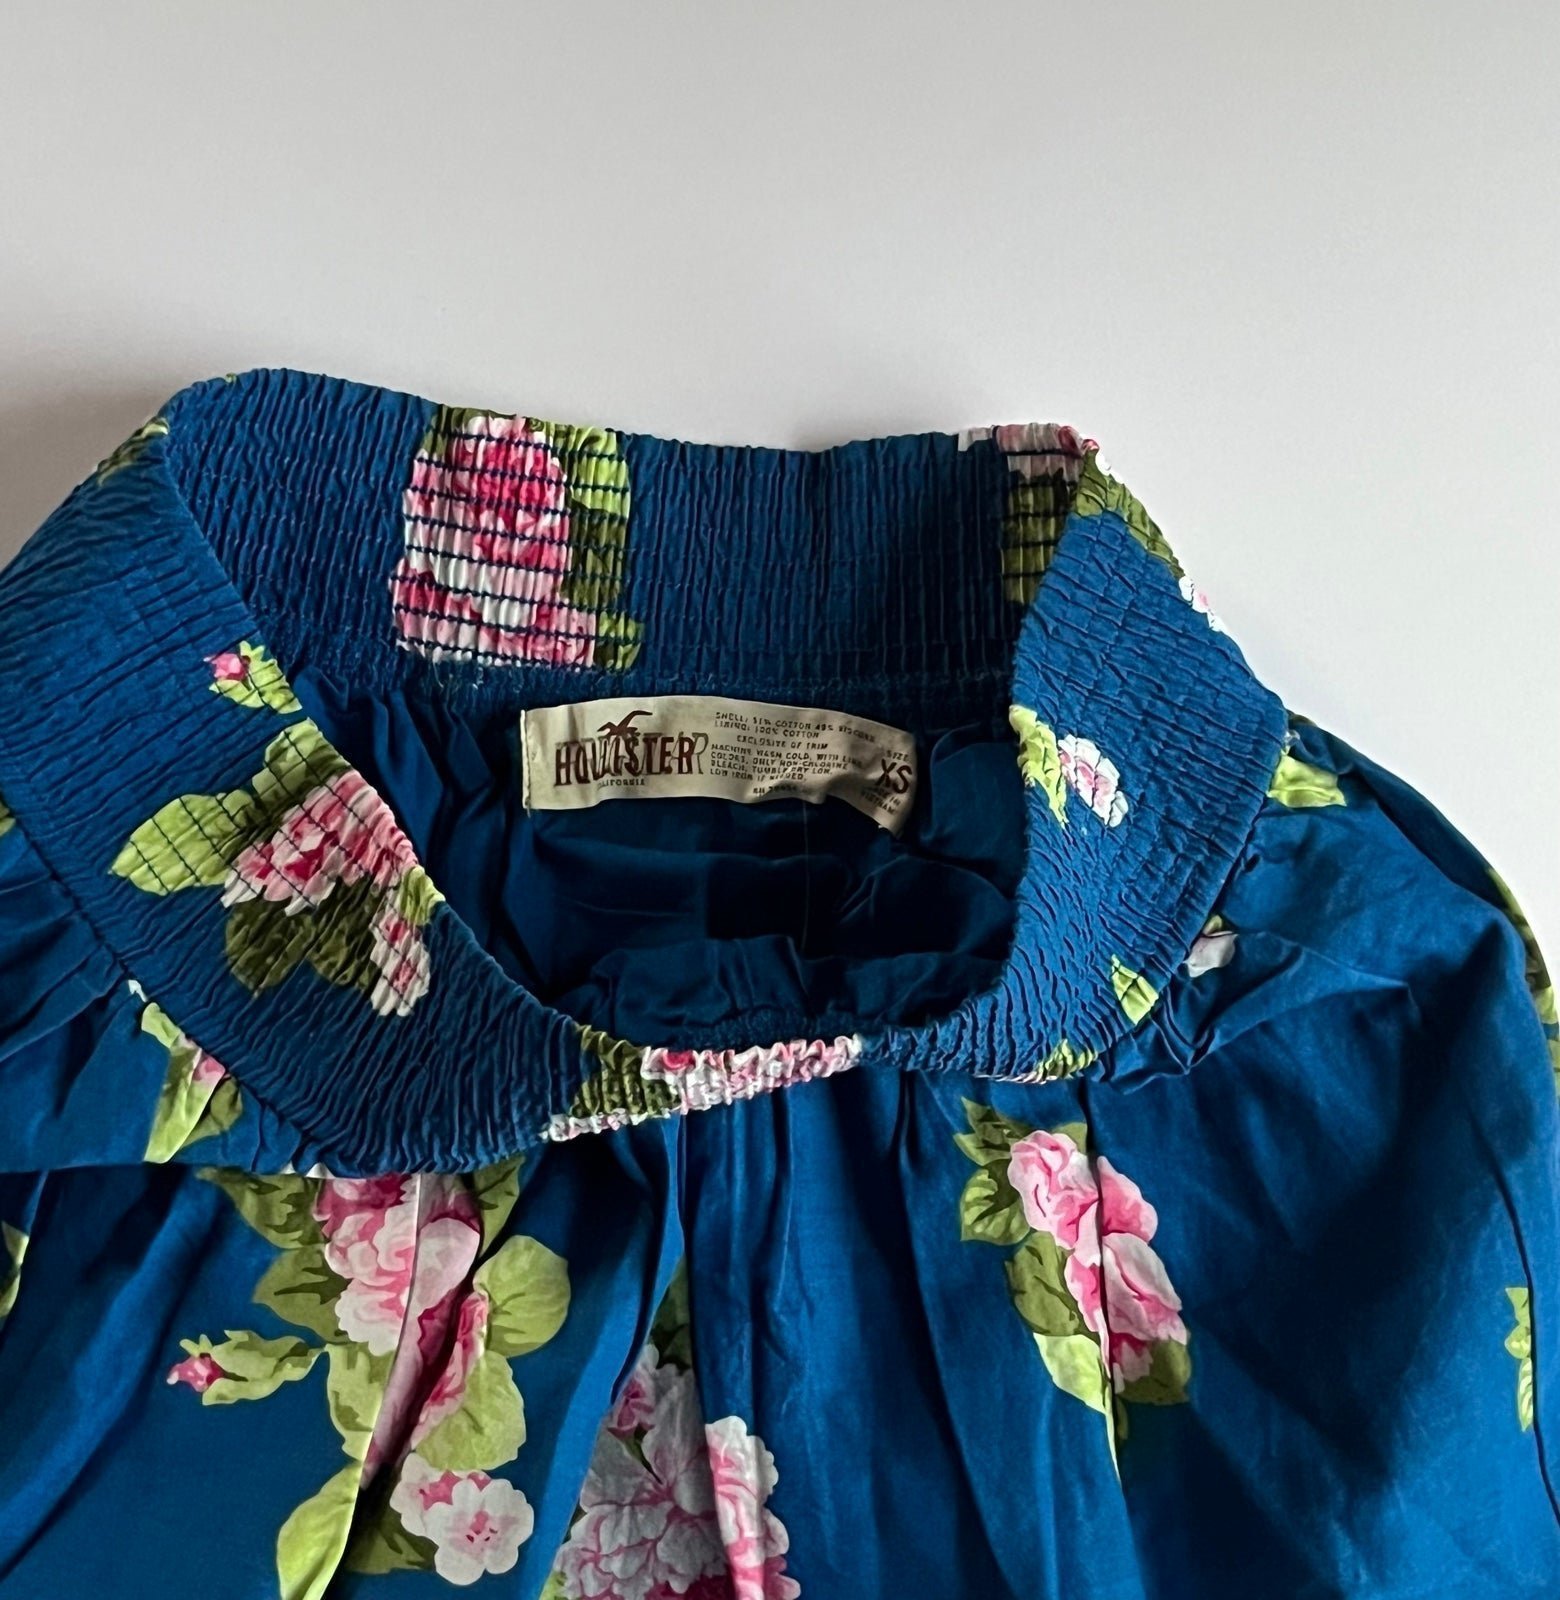 good price Hollister Co. Floral Skirt (Blue/Pink/Green), Extra Small KgnrYH6ay Counter Genuine 